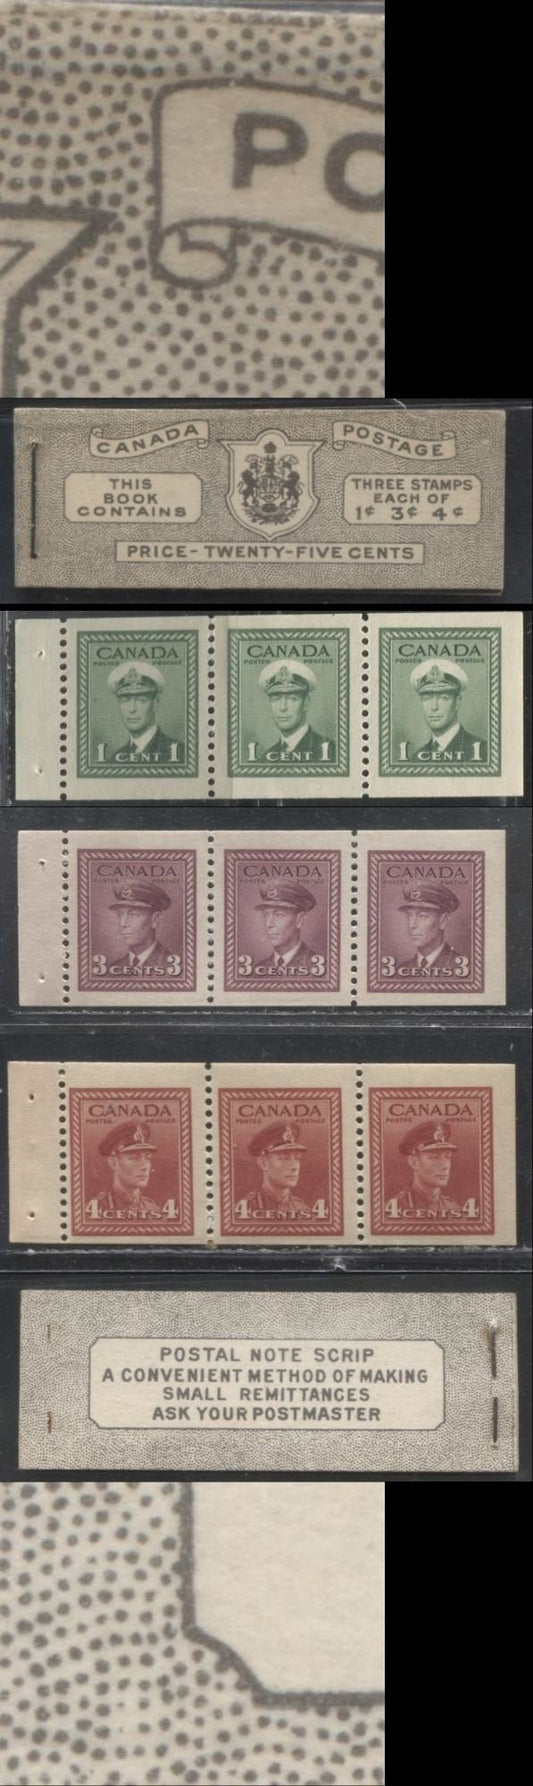 Lot 289 Canada #BK38a 1942-1949 War Issue Complete 25c, English Booklet Containing 1 Pane Each of 3 of 1c Green, 3c Rosy Plum and 4c Carmine Red, Harris Front Cover Type IVd , Back Cover Haiii, 7c & 6c Rate Page